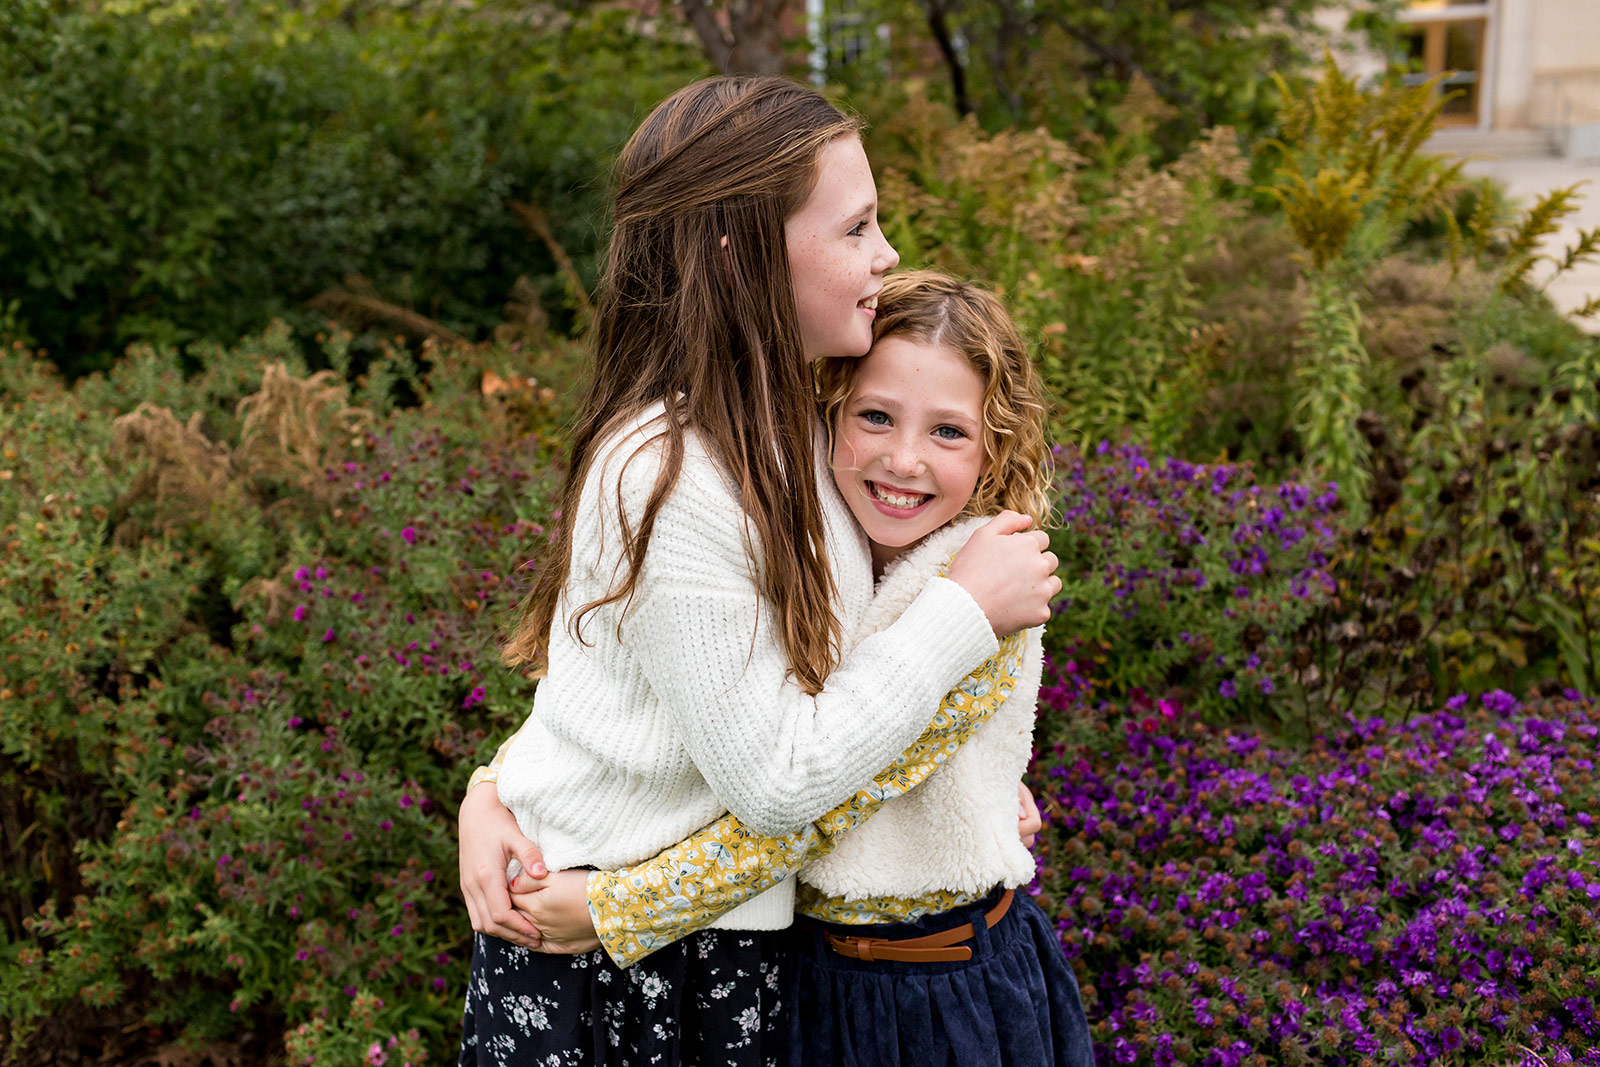 Nora and Harper hug each other tight in front of purple flowers.